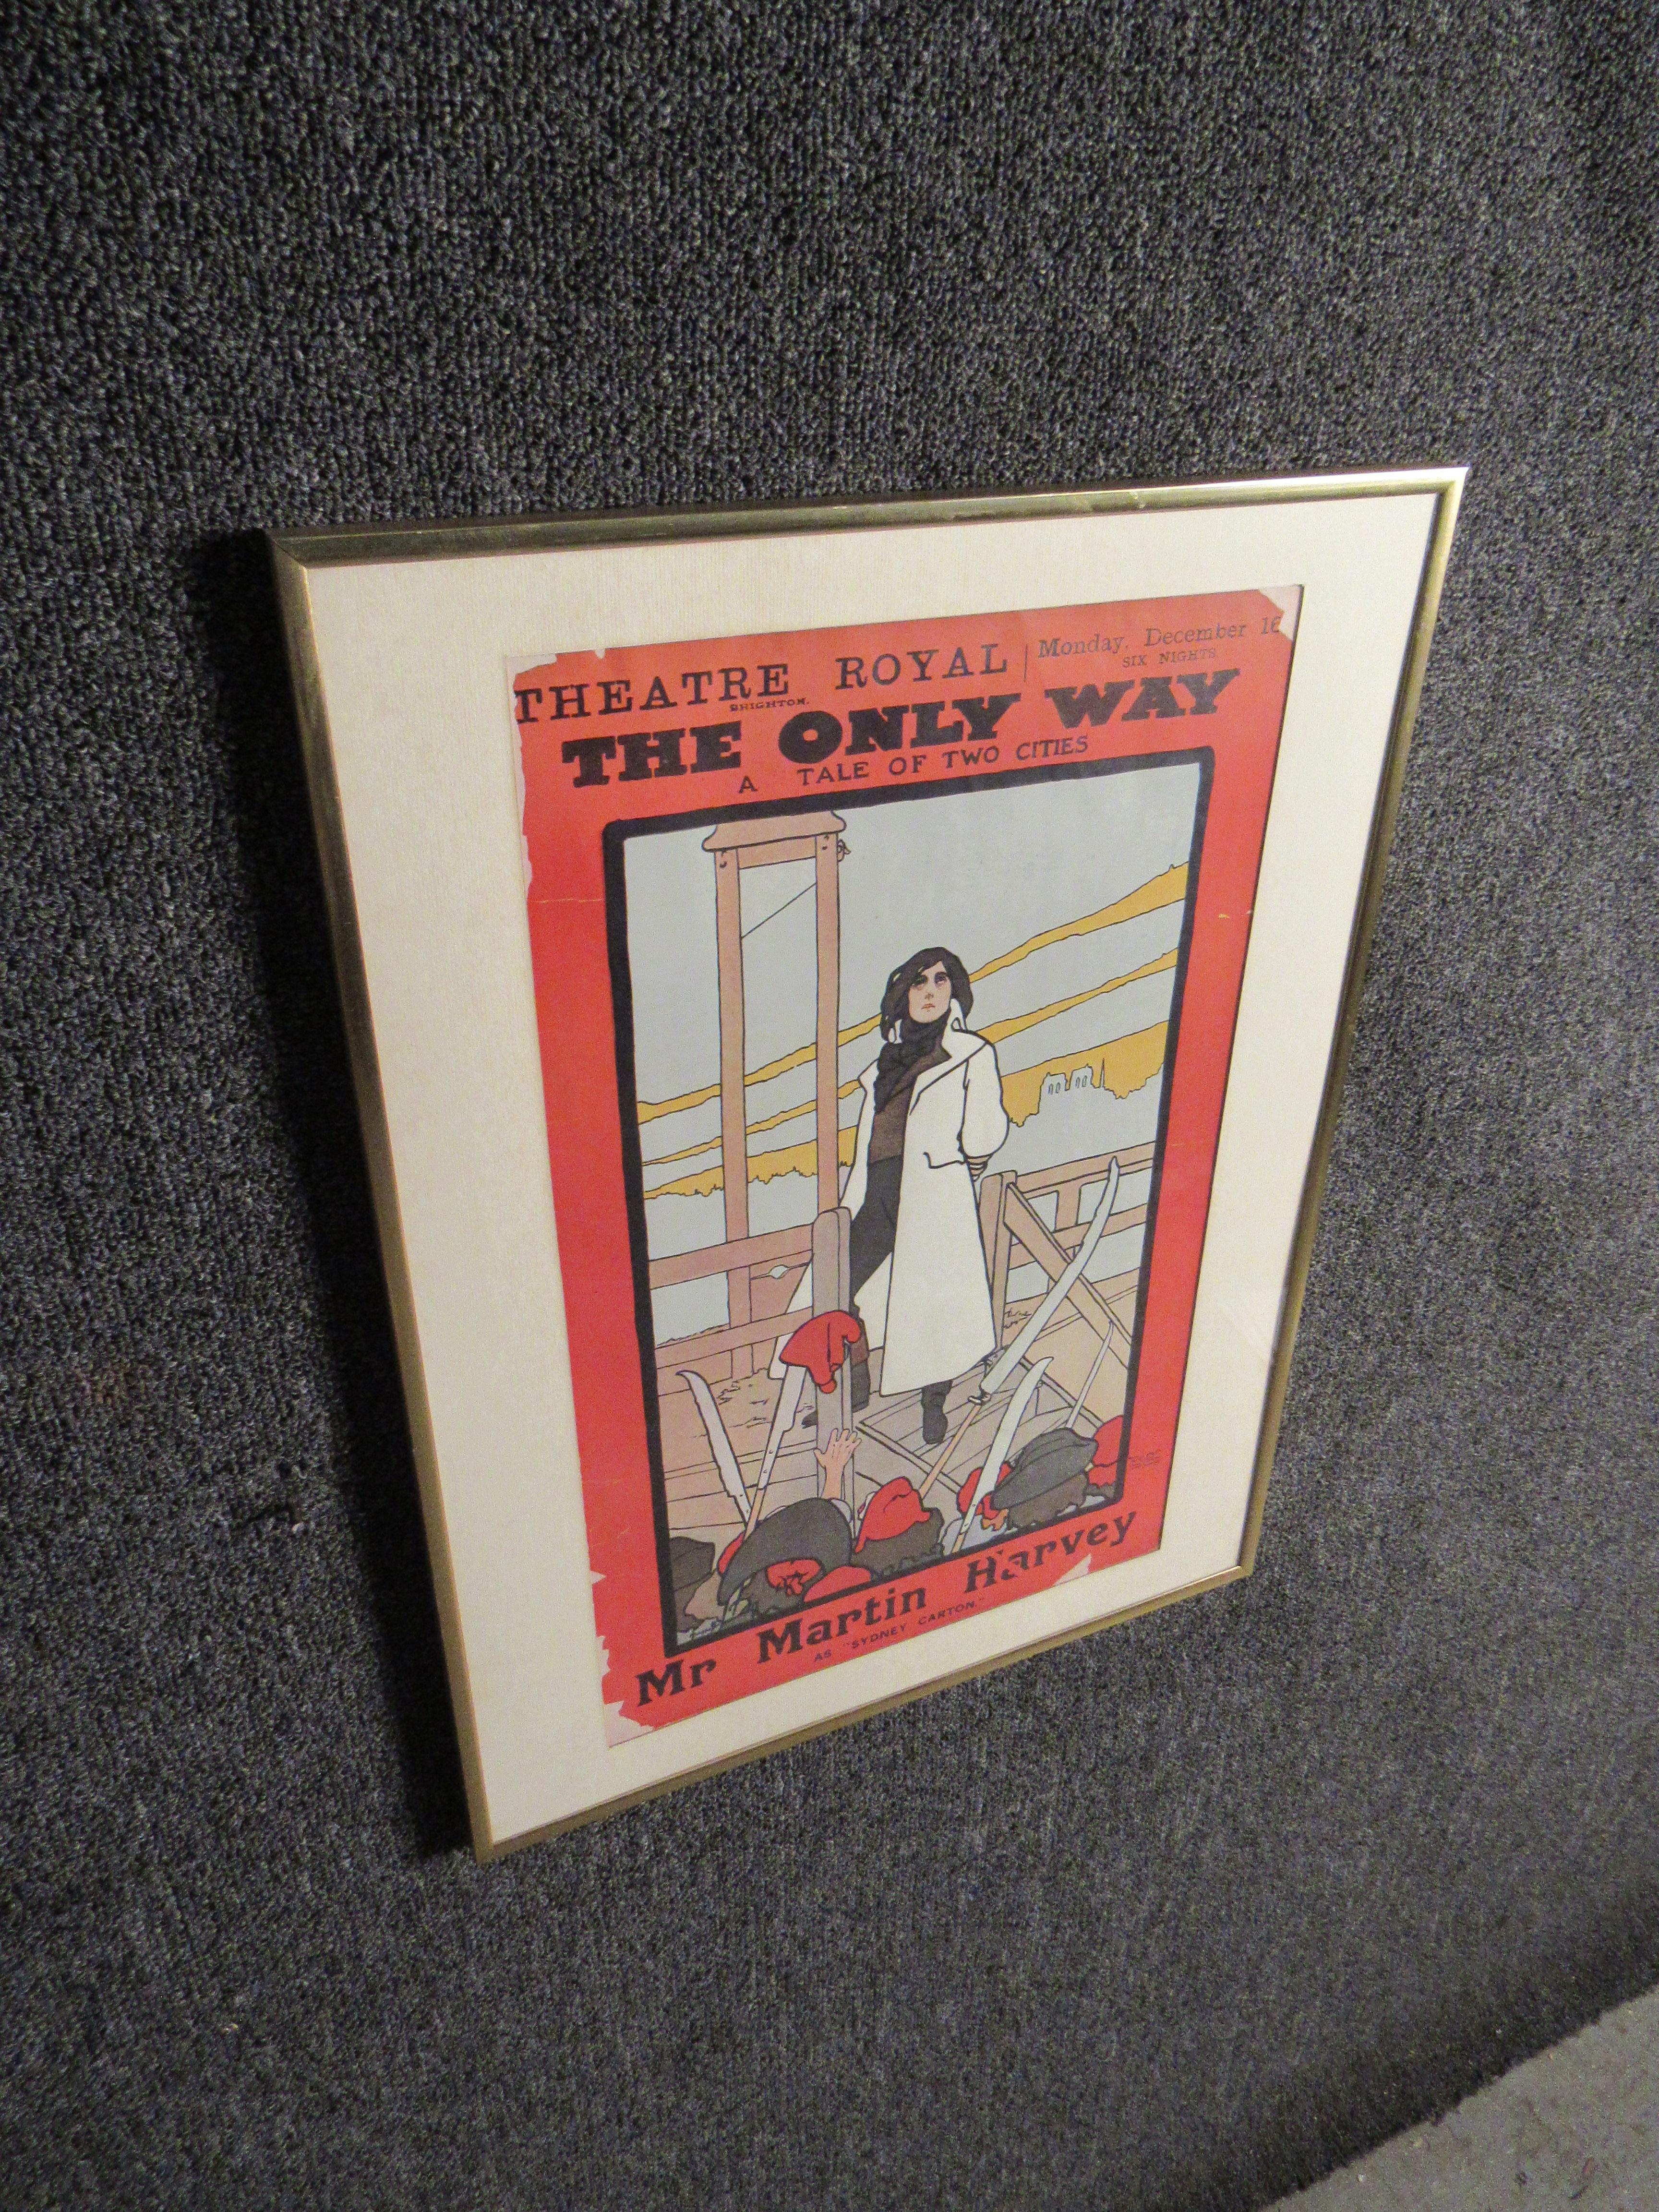 Bring home iconic early 20th century decor with this framed vintage playbill. Illustrated by renowned artist and Englishman John Hassall in collaboration with the famed printmakers of David Allen & Sons for the 1899 production of 